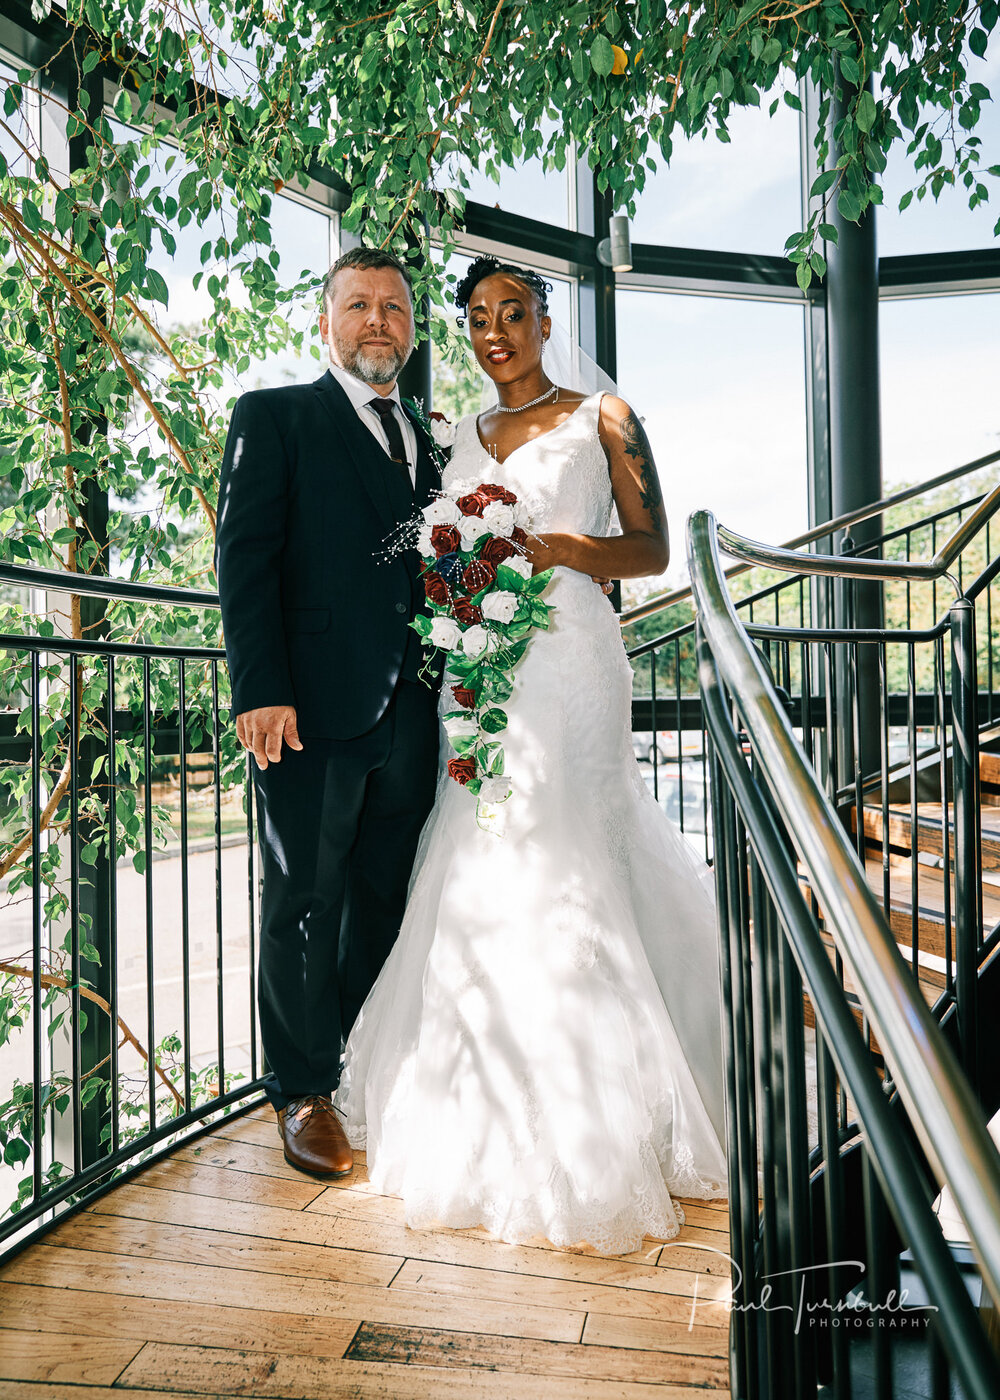 Bride and groom on the staircase at Lazaat Hotel. Bride and groom enjoying the gardens of Lazaat Hotel. Wedding photographer Hull